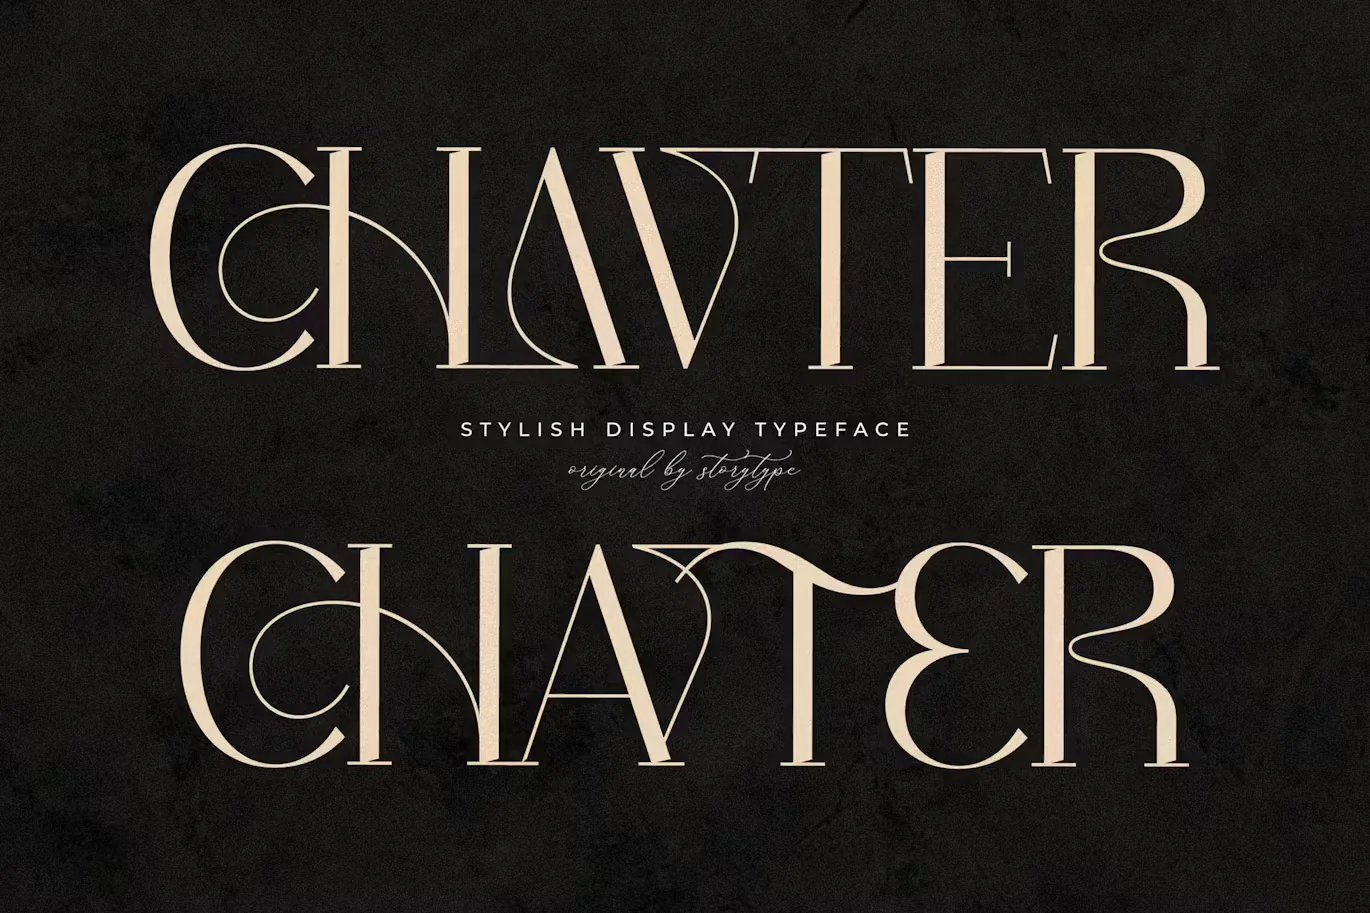 Chavter Stylish Display Typeface Font